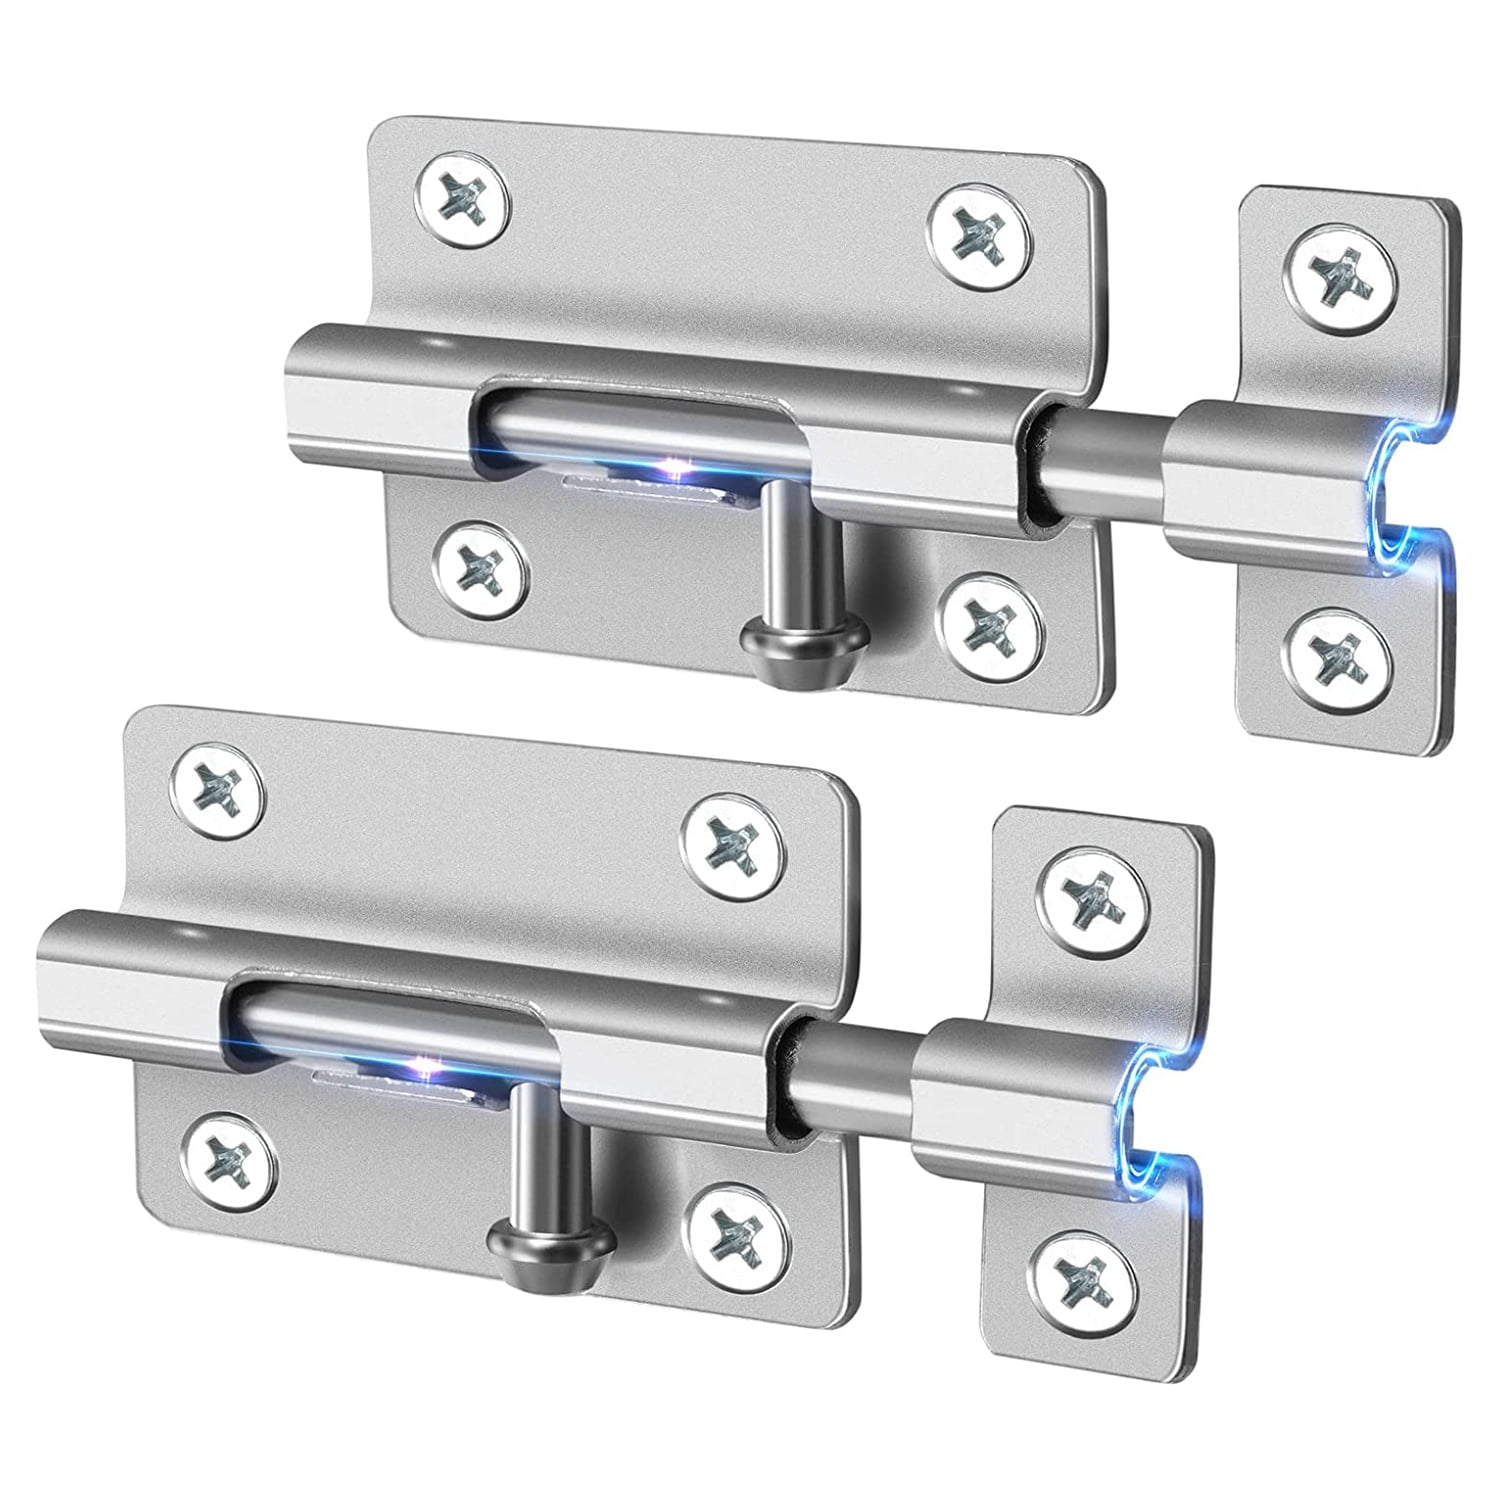 TSV 20/10Pcs Adjustable Baby Safety Locks Straps Latches for Kids Child  Toddler Proofing Cabinets, Drawers Sliding Doors, Refrigerator, Windows,  Toilet Seat, Lever Door Handle, Fridge and Oven 